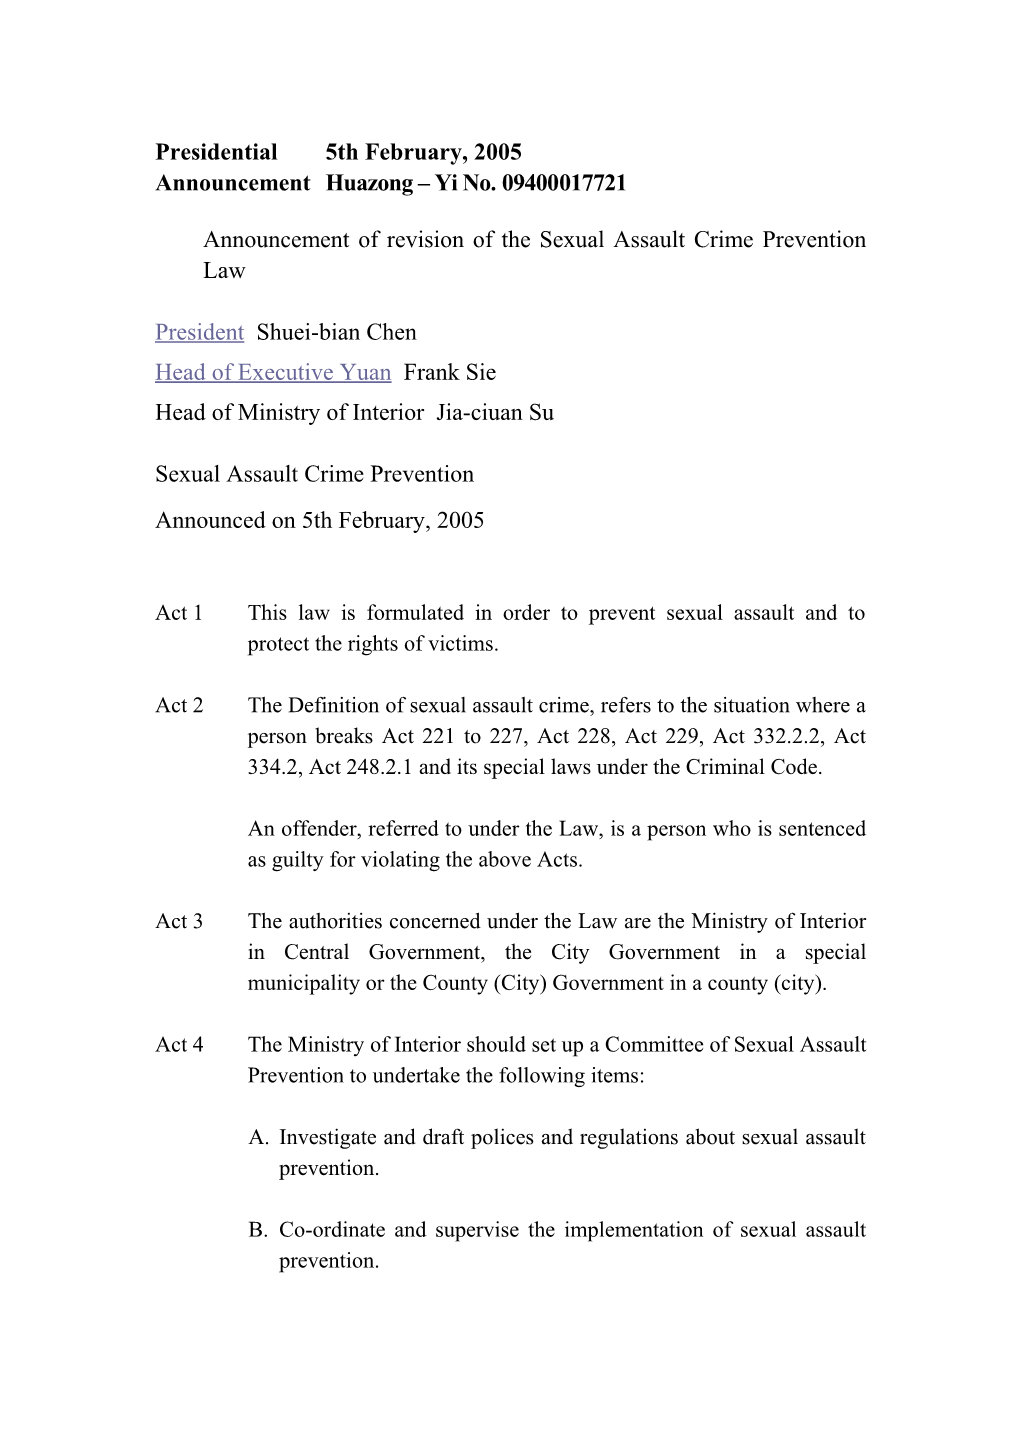 Announcement of Revision of the Sexual Assault Crime Prevention Law